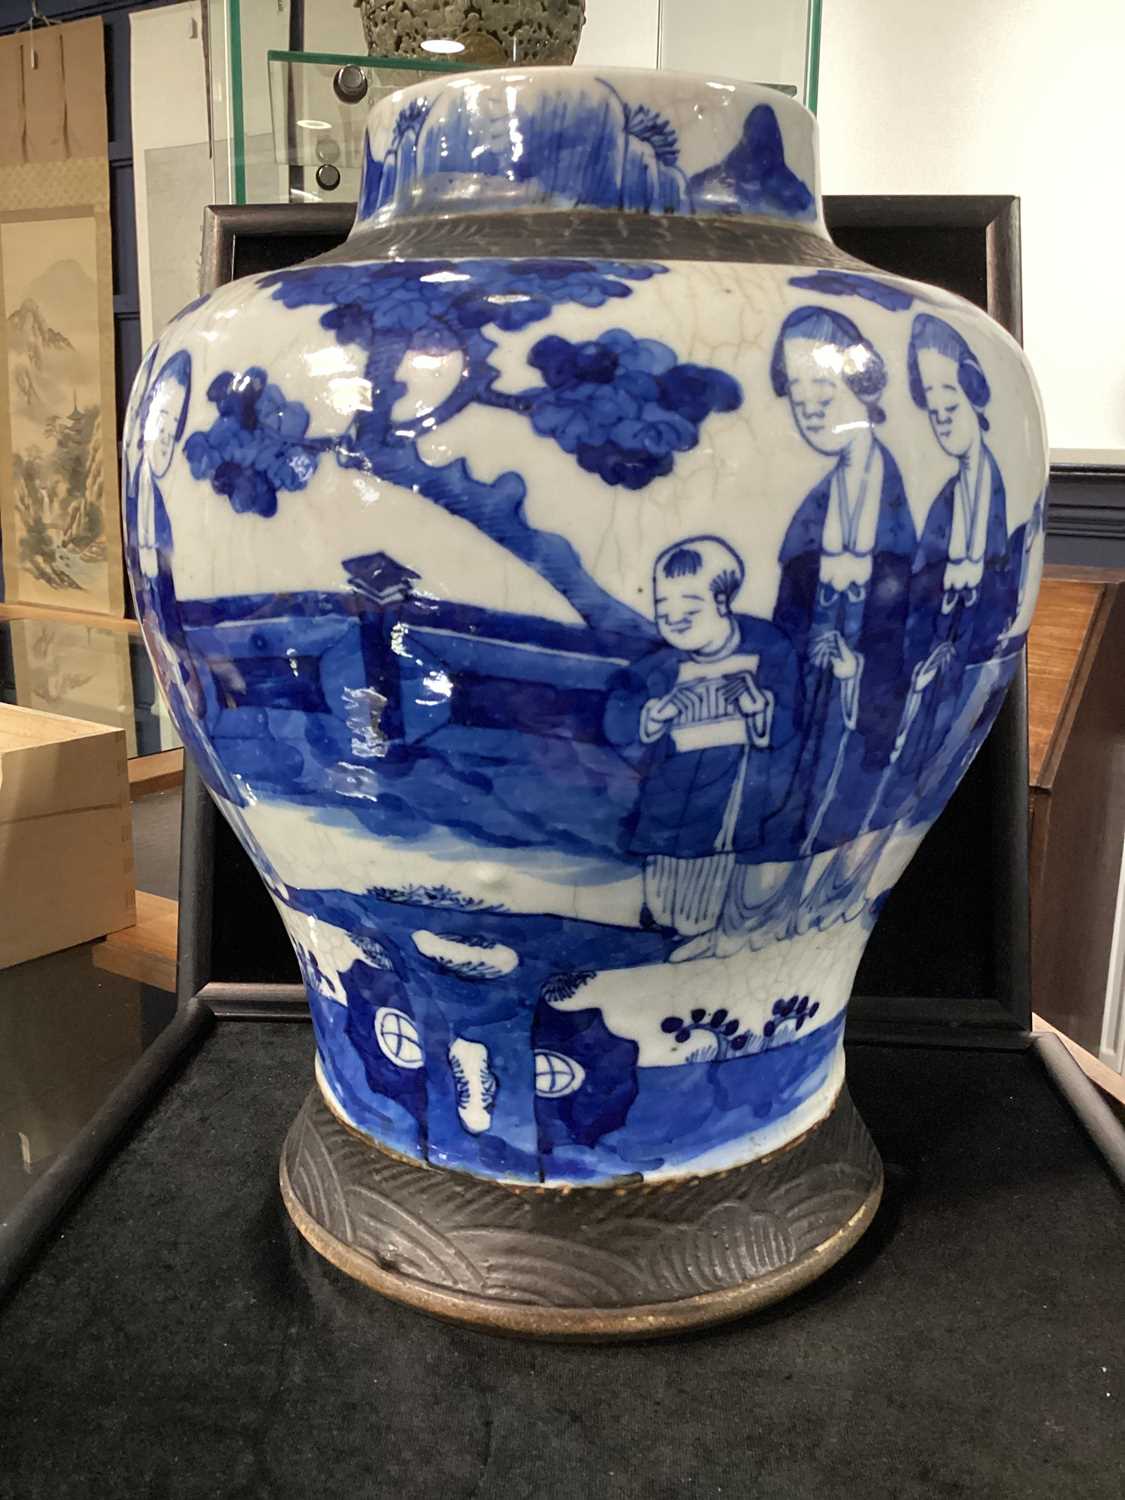 CHINESE BLUE AND WHITE CRACKLE GLAZE VASE, LATE 19TH/EARLY 20TH CENTURY - Image 2 of 6